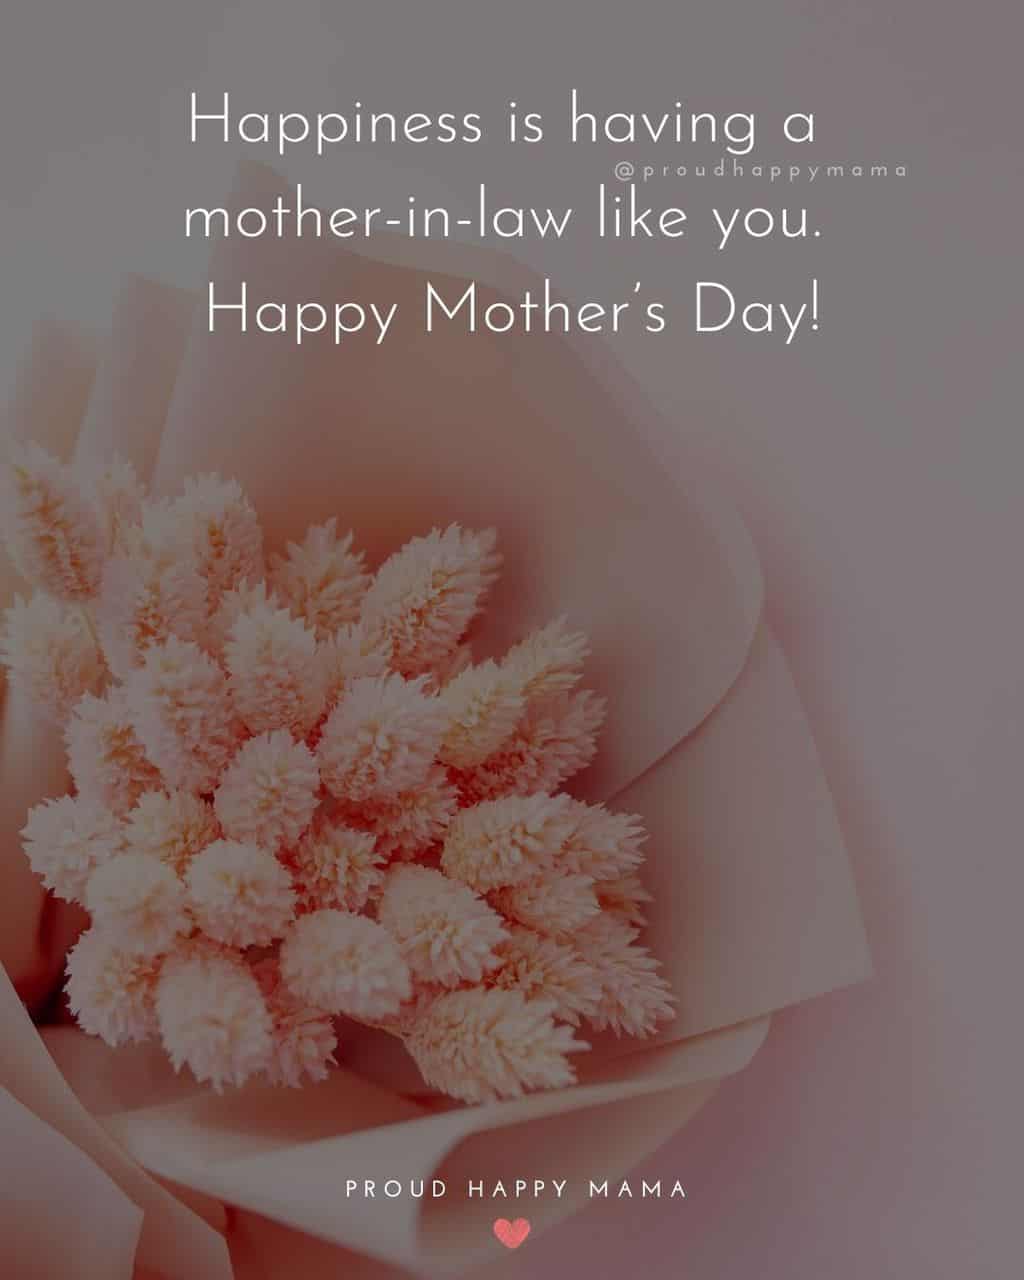 Happy Mothers Day Quotes For Mother In Law - Happiness is having a mother in law like you. Happy Mother’s Day!’